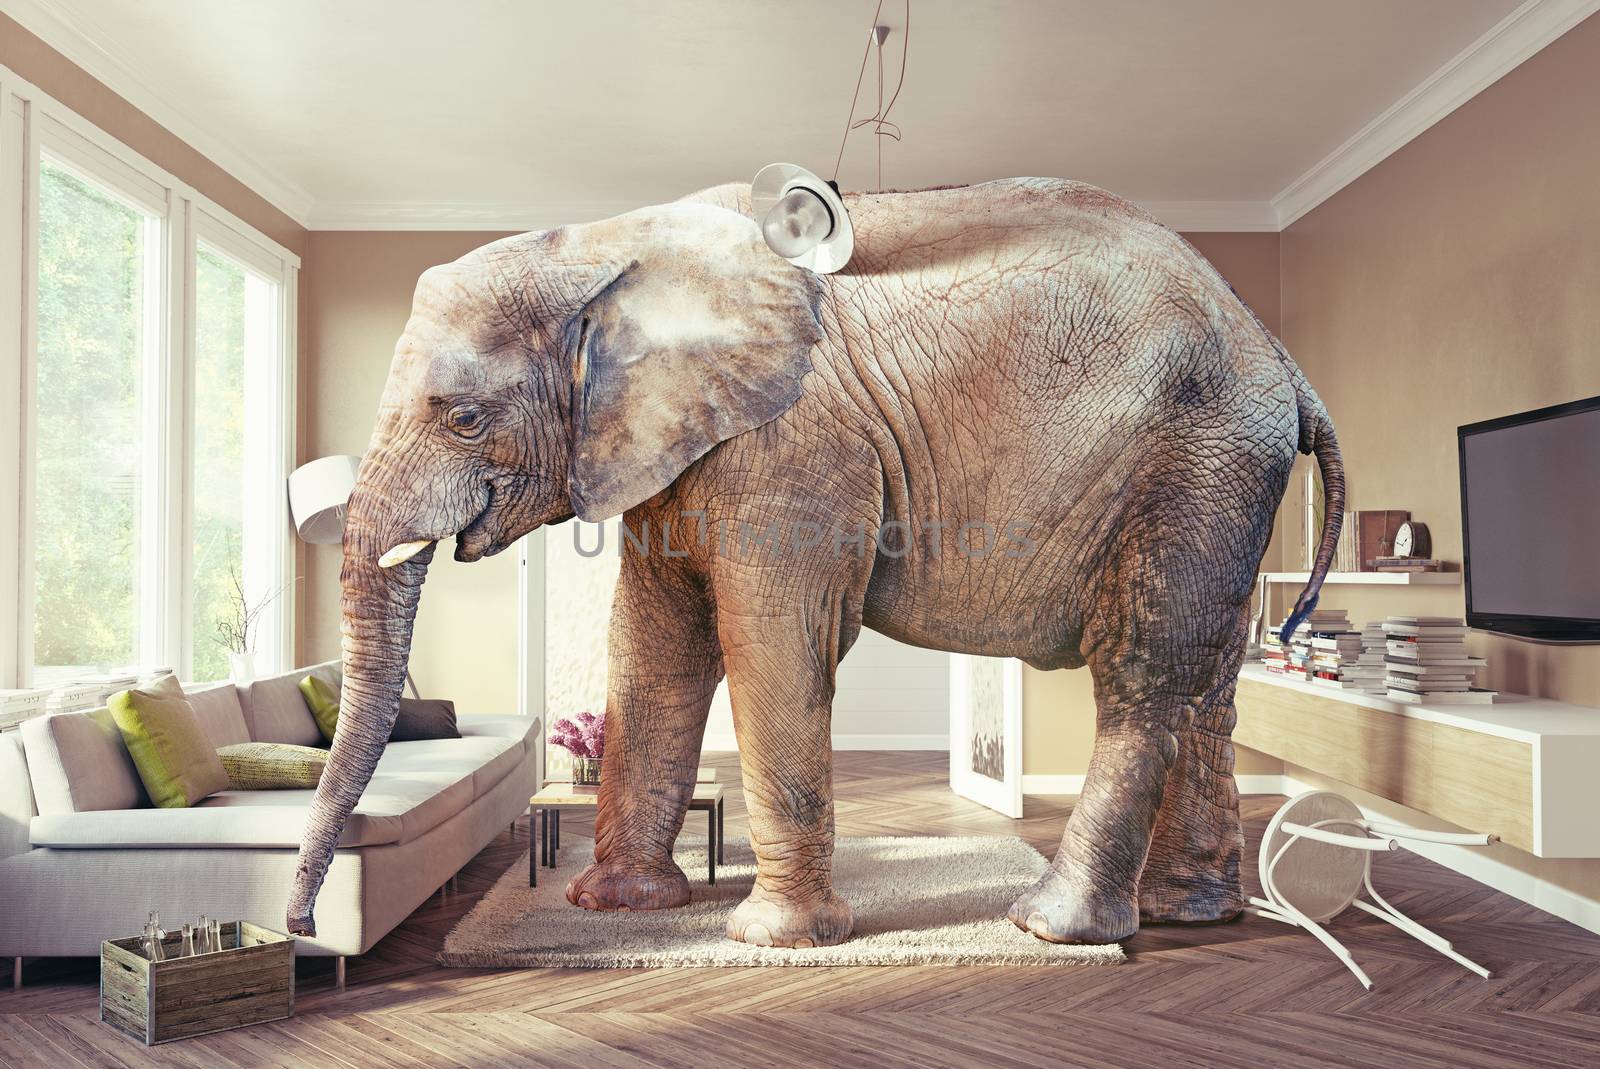 Big elephant and the case of beer  in the living room. 3d concept